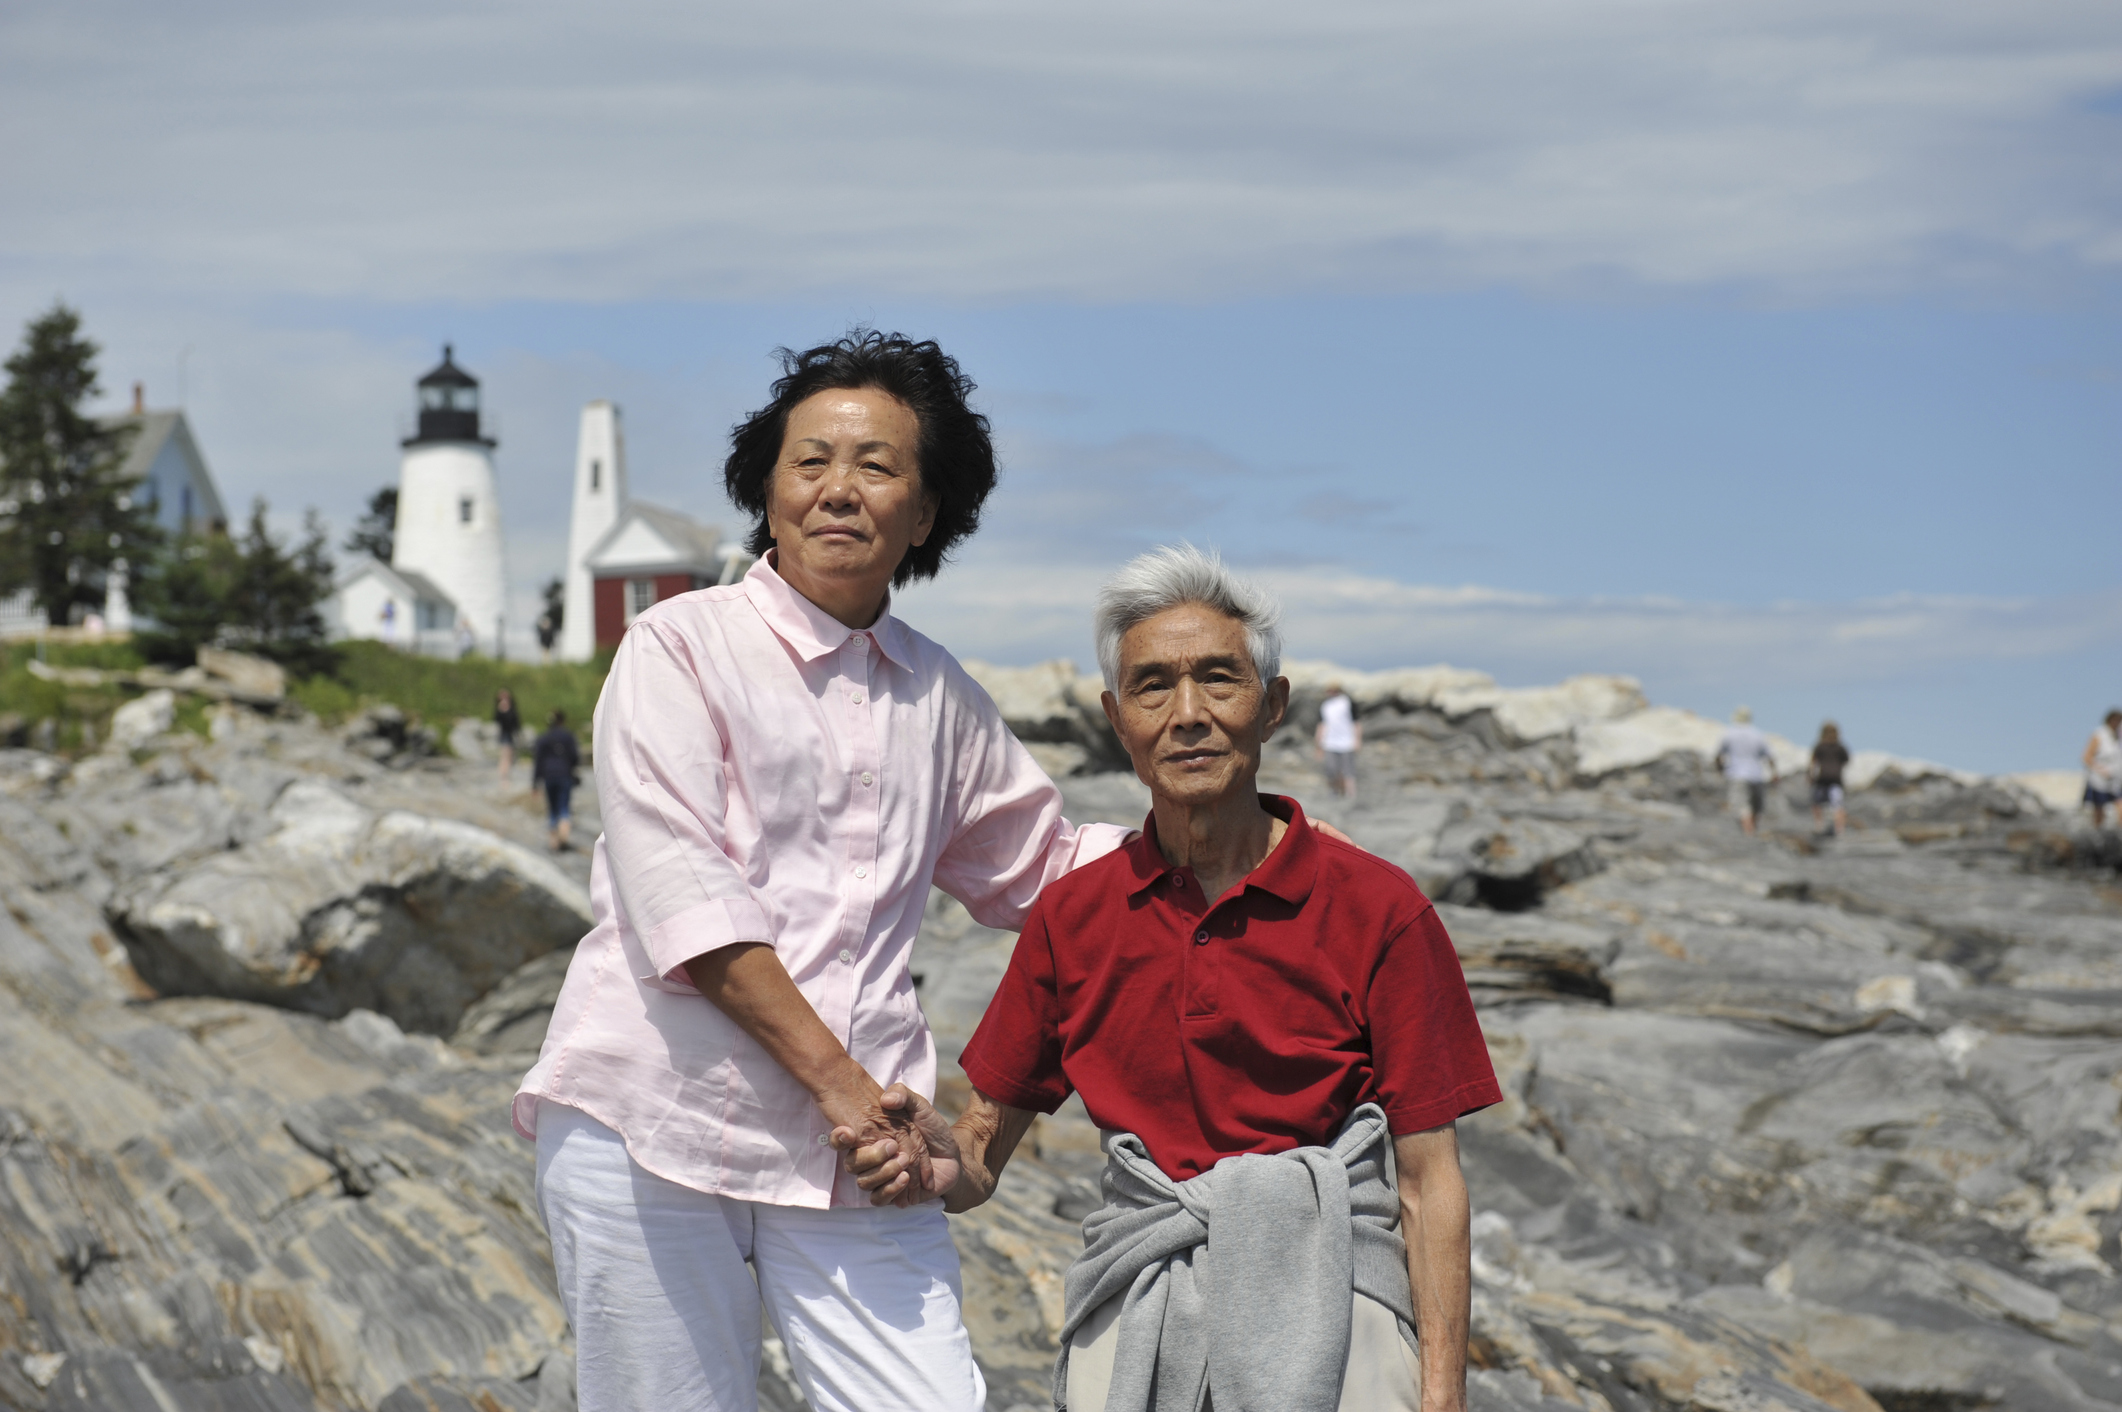 Senior couple at Pemaquid Point Maine -- lighthouse rocks and ocean visible in background